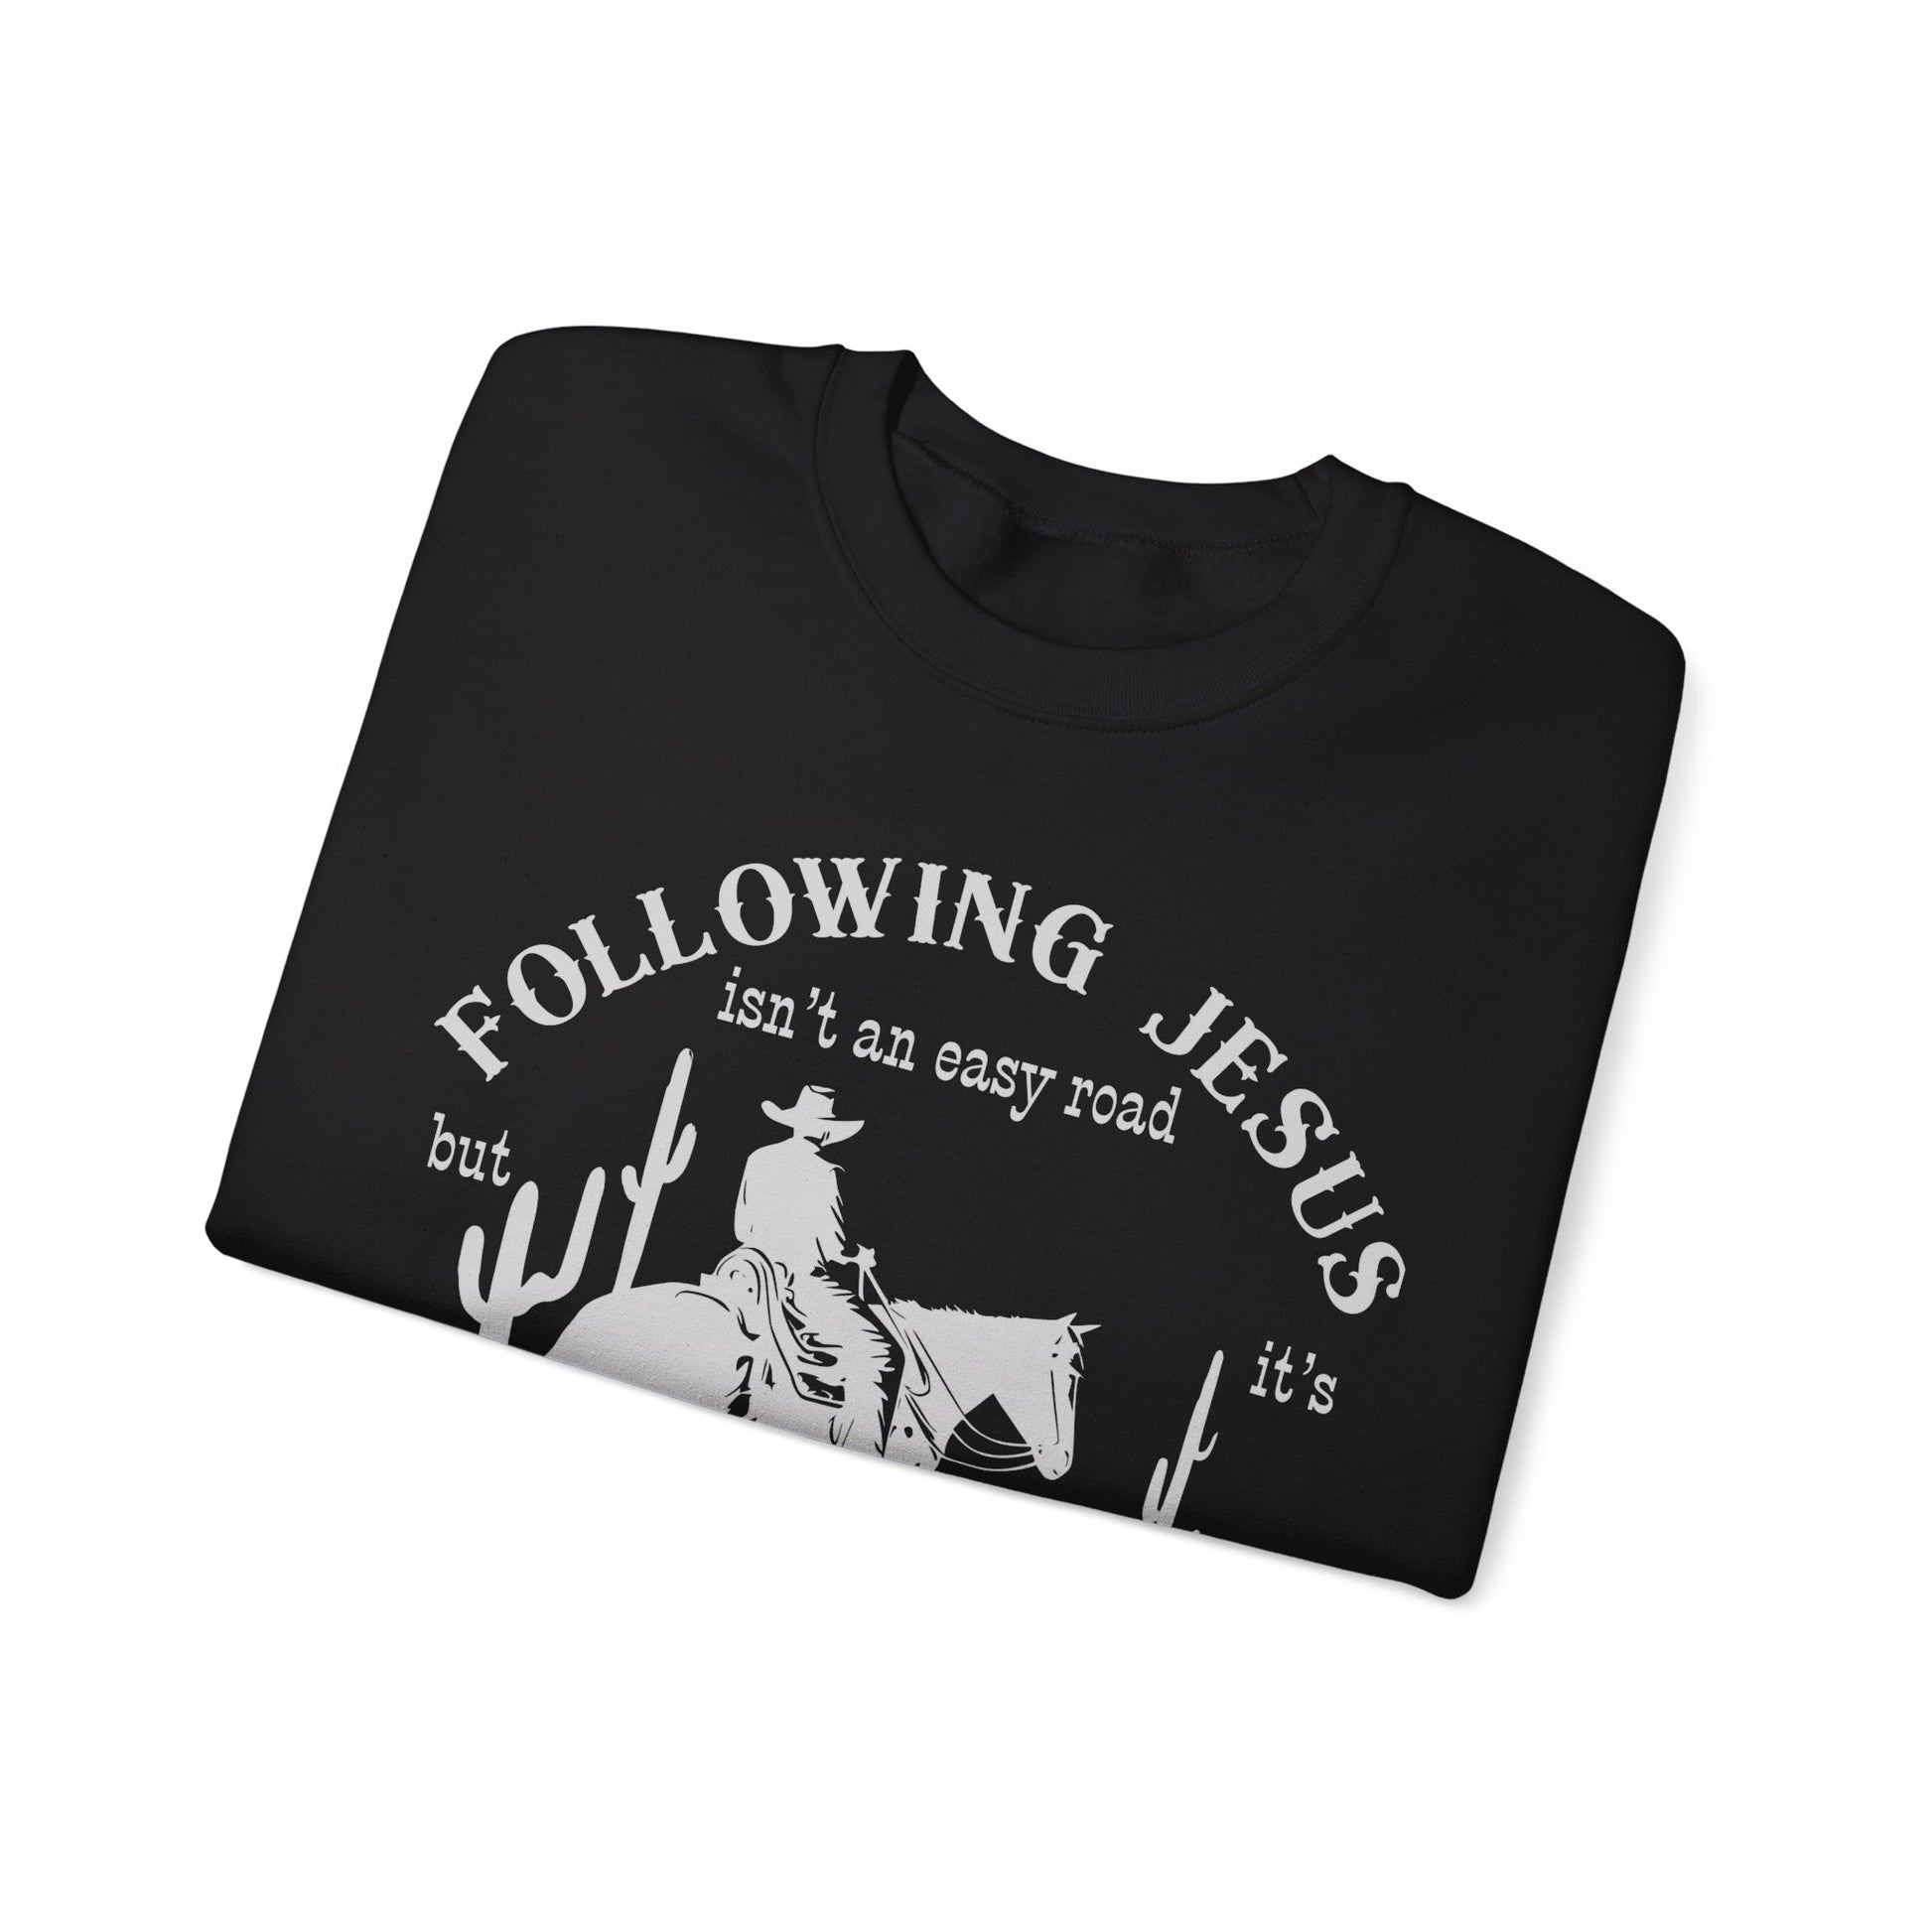 Following Jesus isn’t an Easy Road But Jesus Christian Sweatshirt Father’s Day gift Christian gift Jesus saves Jesus Christ Western Cowboy Faith God - Stay Tomorrow Needs You Following Jesus isn’t an Easy Road But Jesus Christian Sweatshirt Father’s Day gift Christian gift Jesus saves Jesus Christ Western Cowboy Faith God